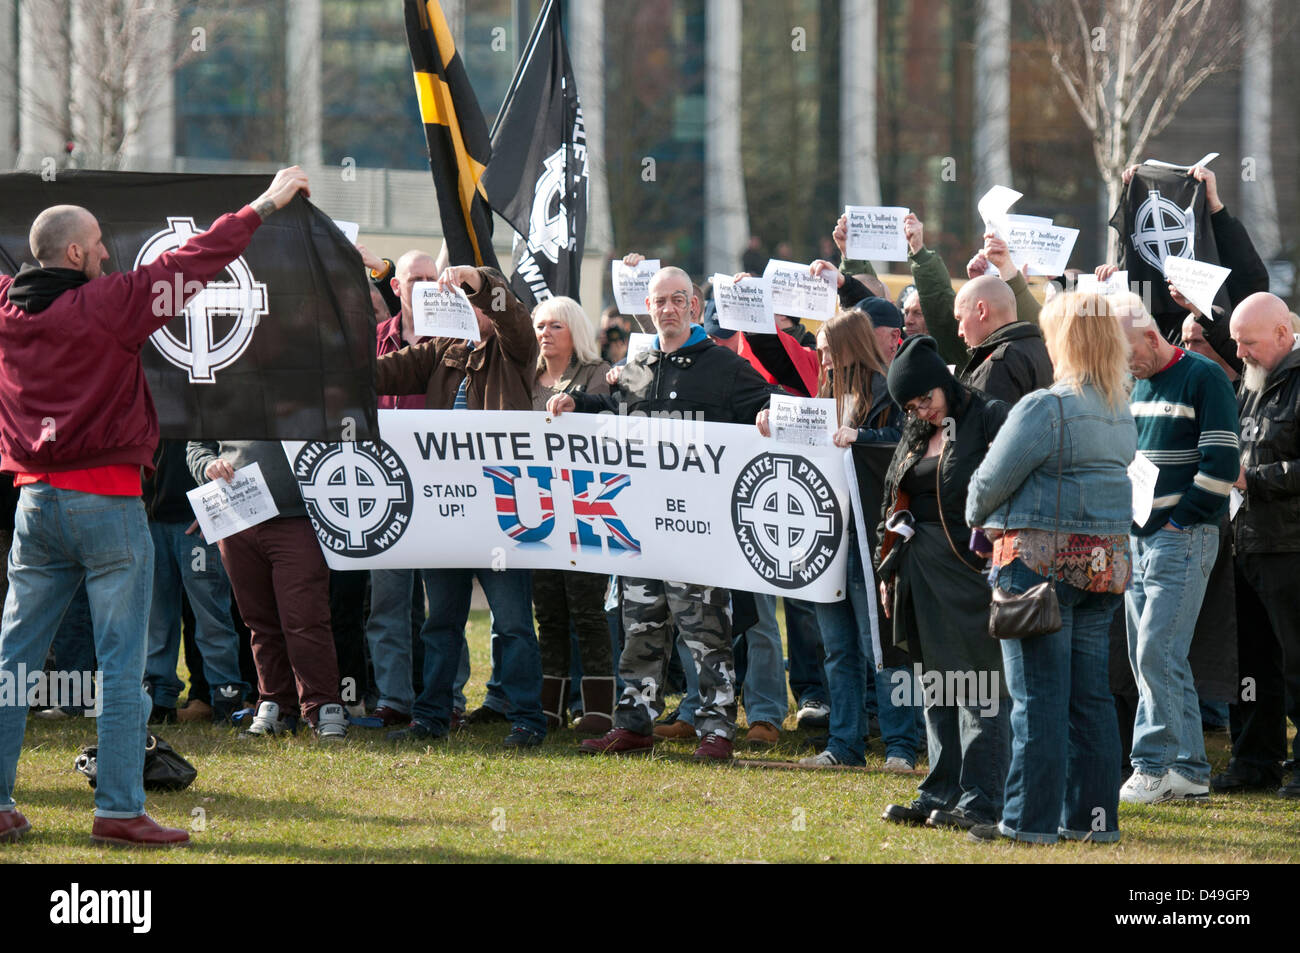 swansea-uk-9th-march-2013-white-pride-day-rally-at-the-waterfront-D49GF9.jpg